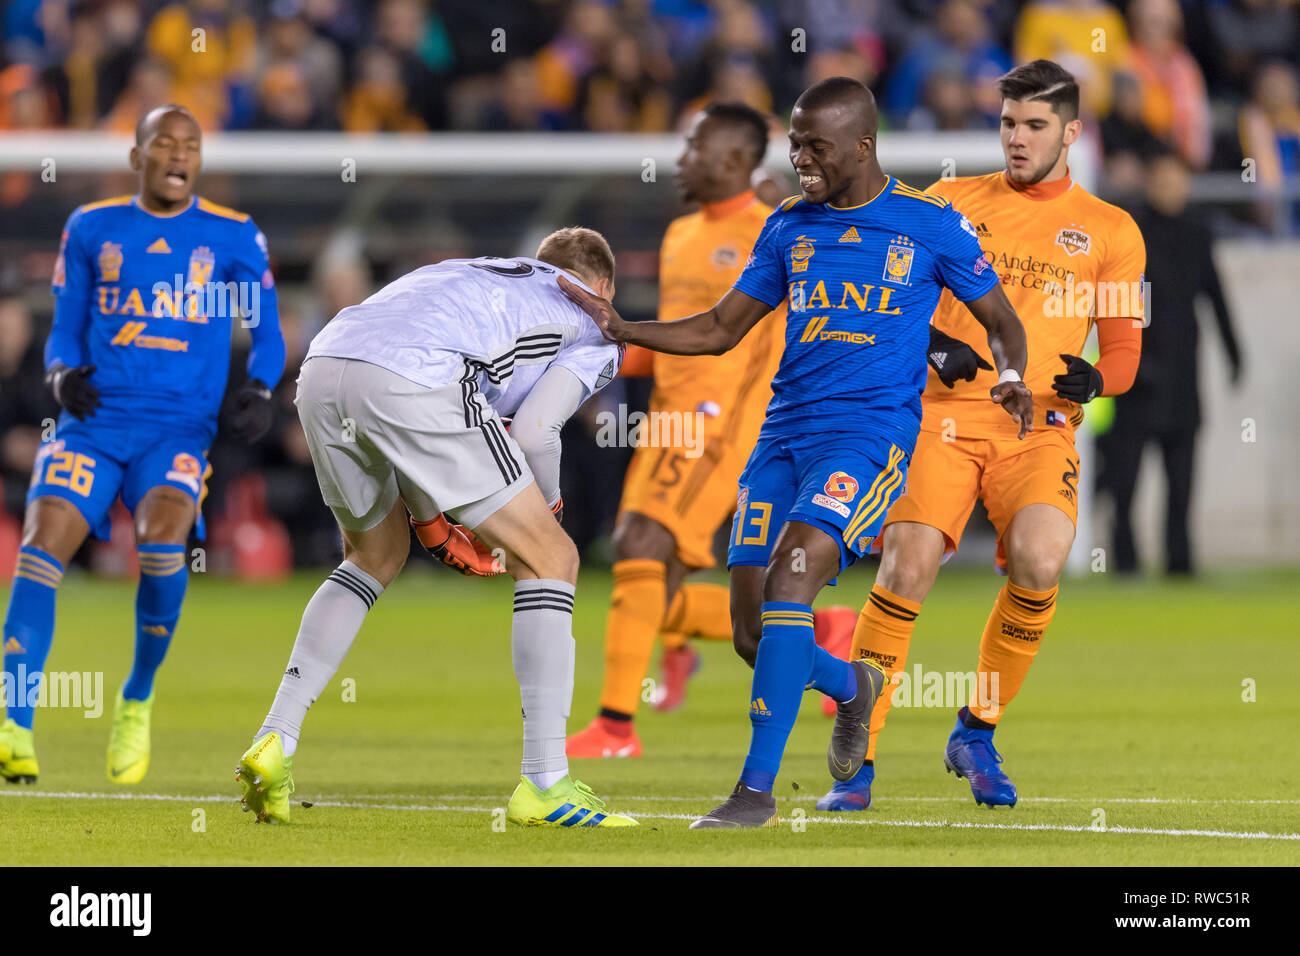 Houston, Texas, USA. 05th Mar, 2019. February 26, 2019: Houston Dynamo goalkeeper Joe Willis (23) saves the ball that was sent for UANL Tigres forward Enner Valencia (13) during the CONCACAF Champions League quarter finals game 18 leg 1 between UANL Tigres and Houston Dynamo at BBVA Compass Stadium in Houston, Texas The score at the half 0-0 © Maria Lysaker/CSM. Credit: Cal Sport Media/Alamy Live News Stock Photo